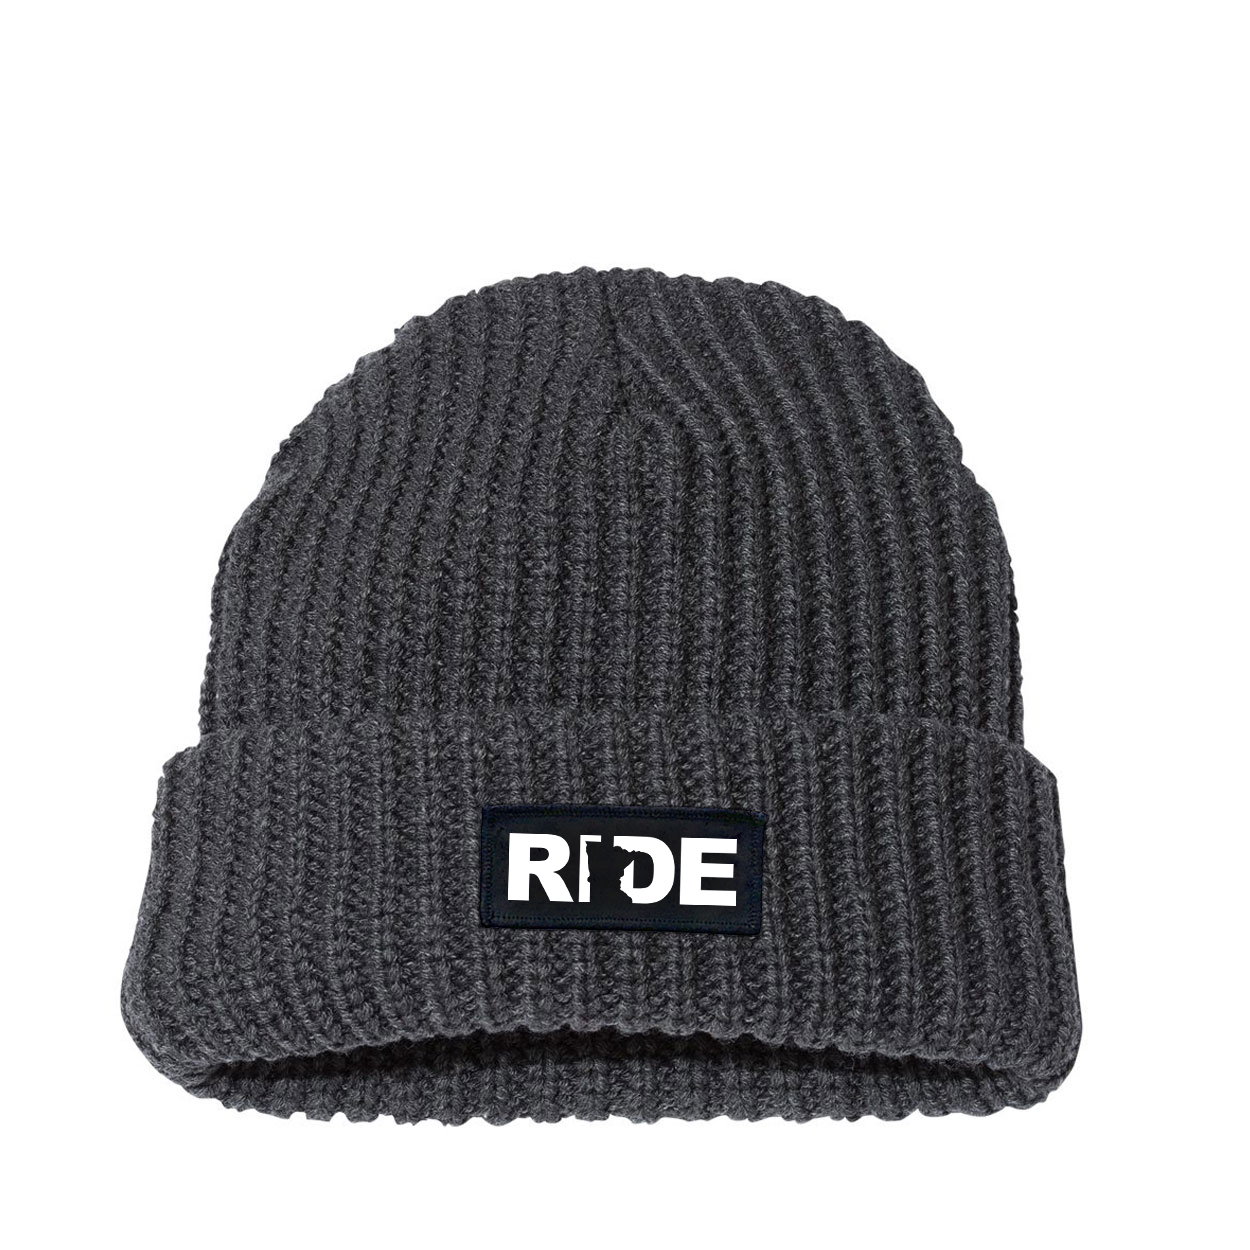 Ride Minnesota Night Out Woven Patch Roll Up Jumbo Chunky Knit Beanie Charcoal (White Logo)